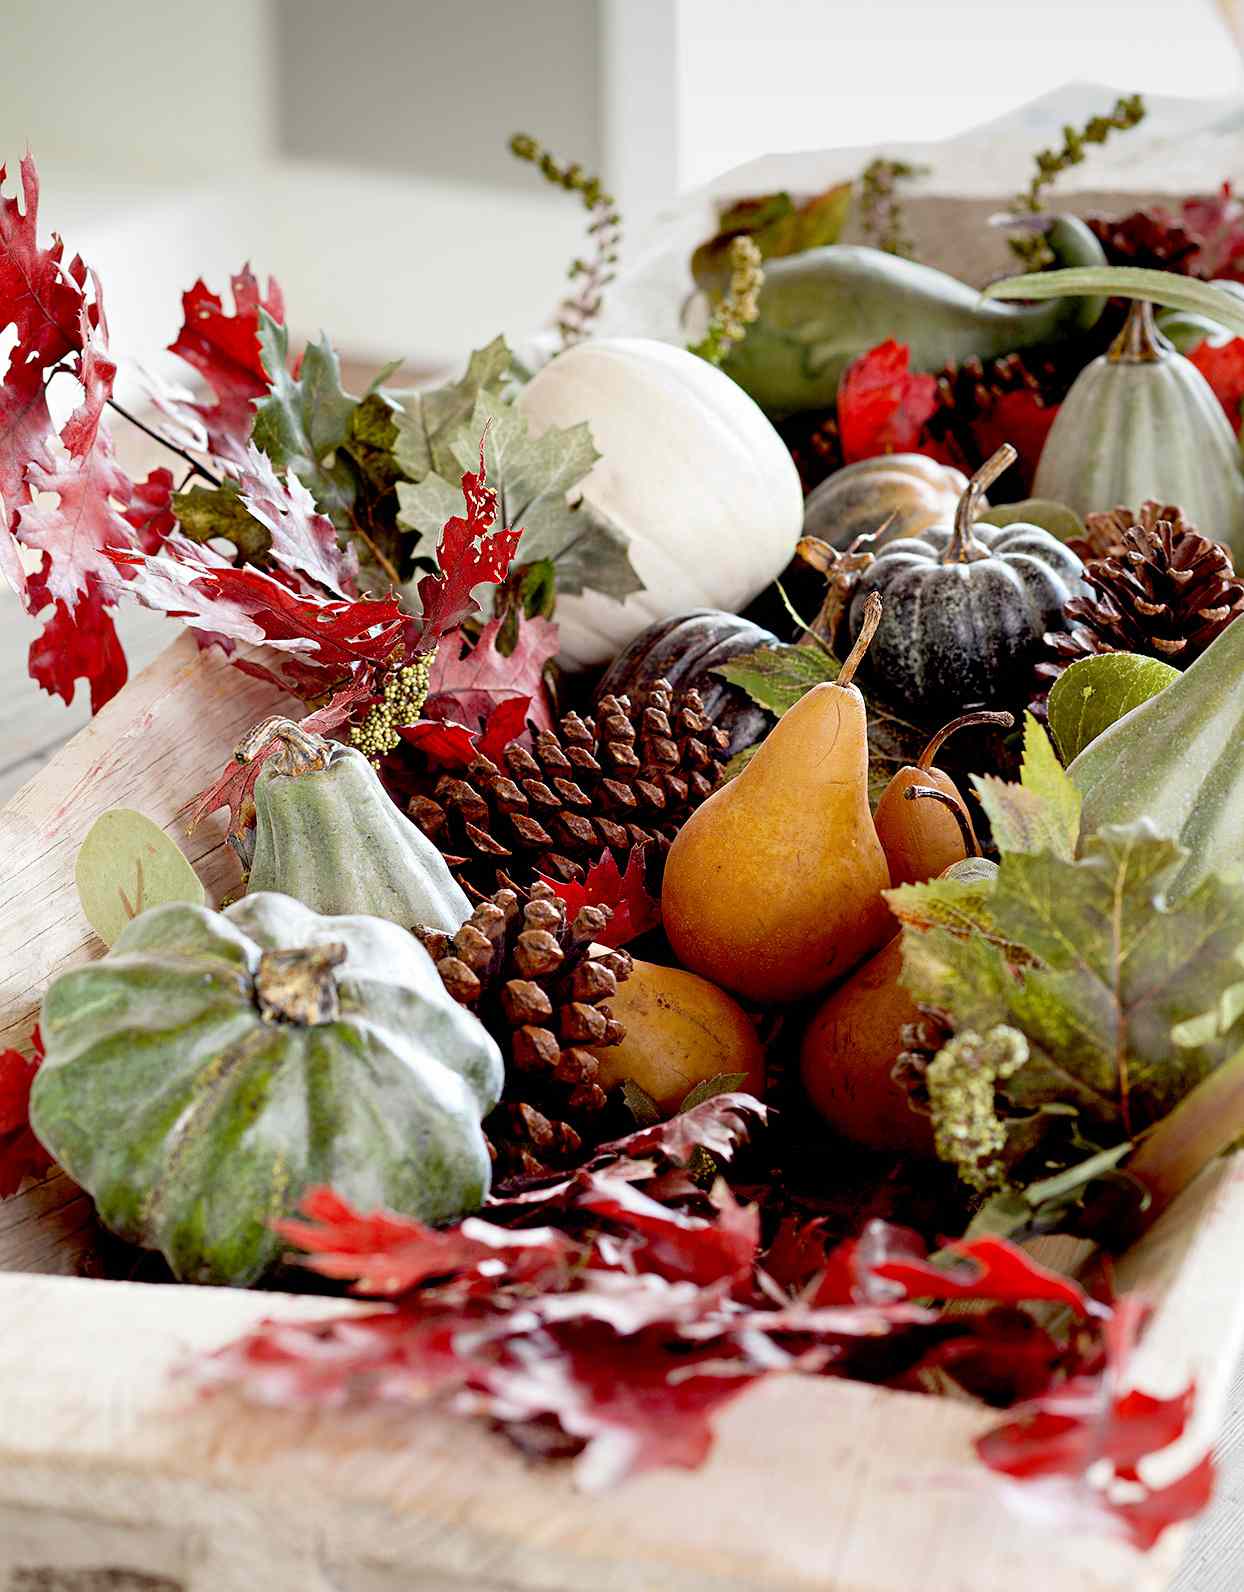 Fall décor with pumpkins, gourds, pears, pinecones, and leaves